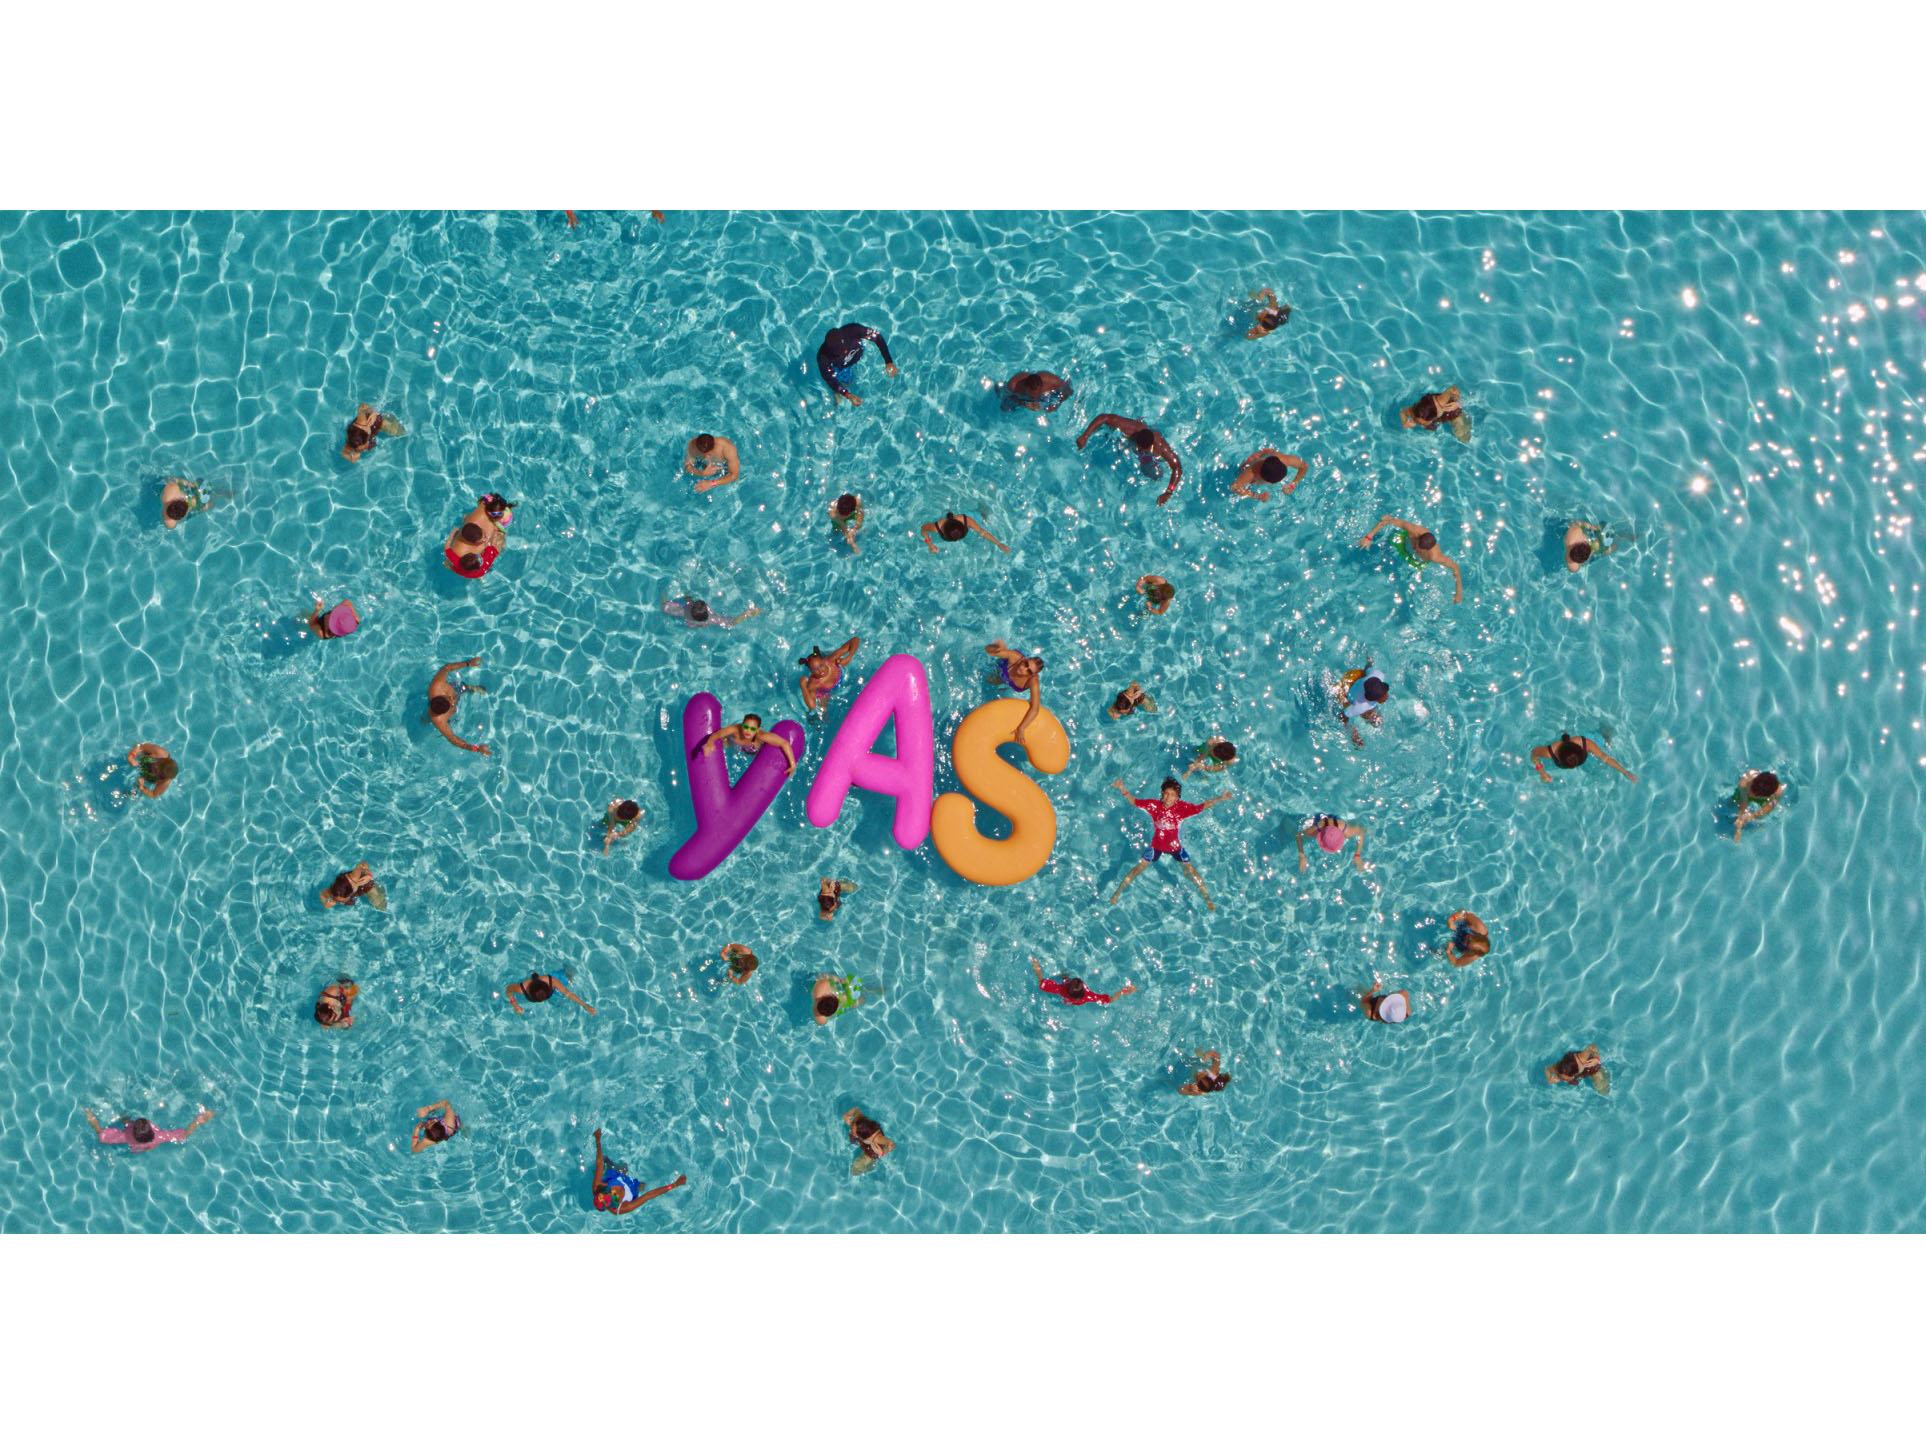 Yas Island brings nostalgia back with catchy new 90’s inspired summer hit “Yas Yas Baby”